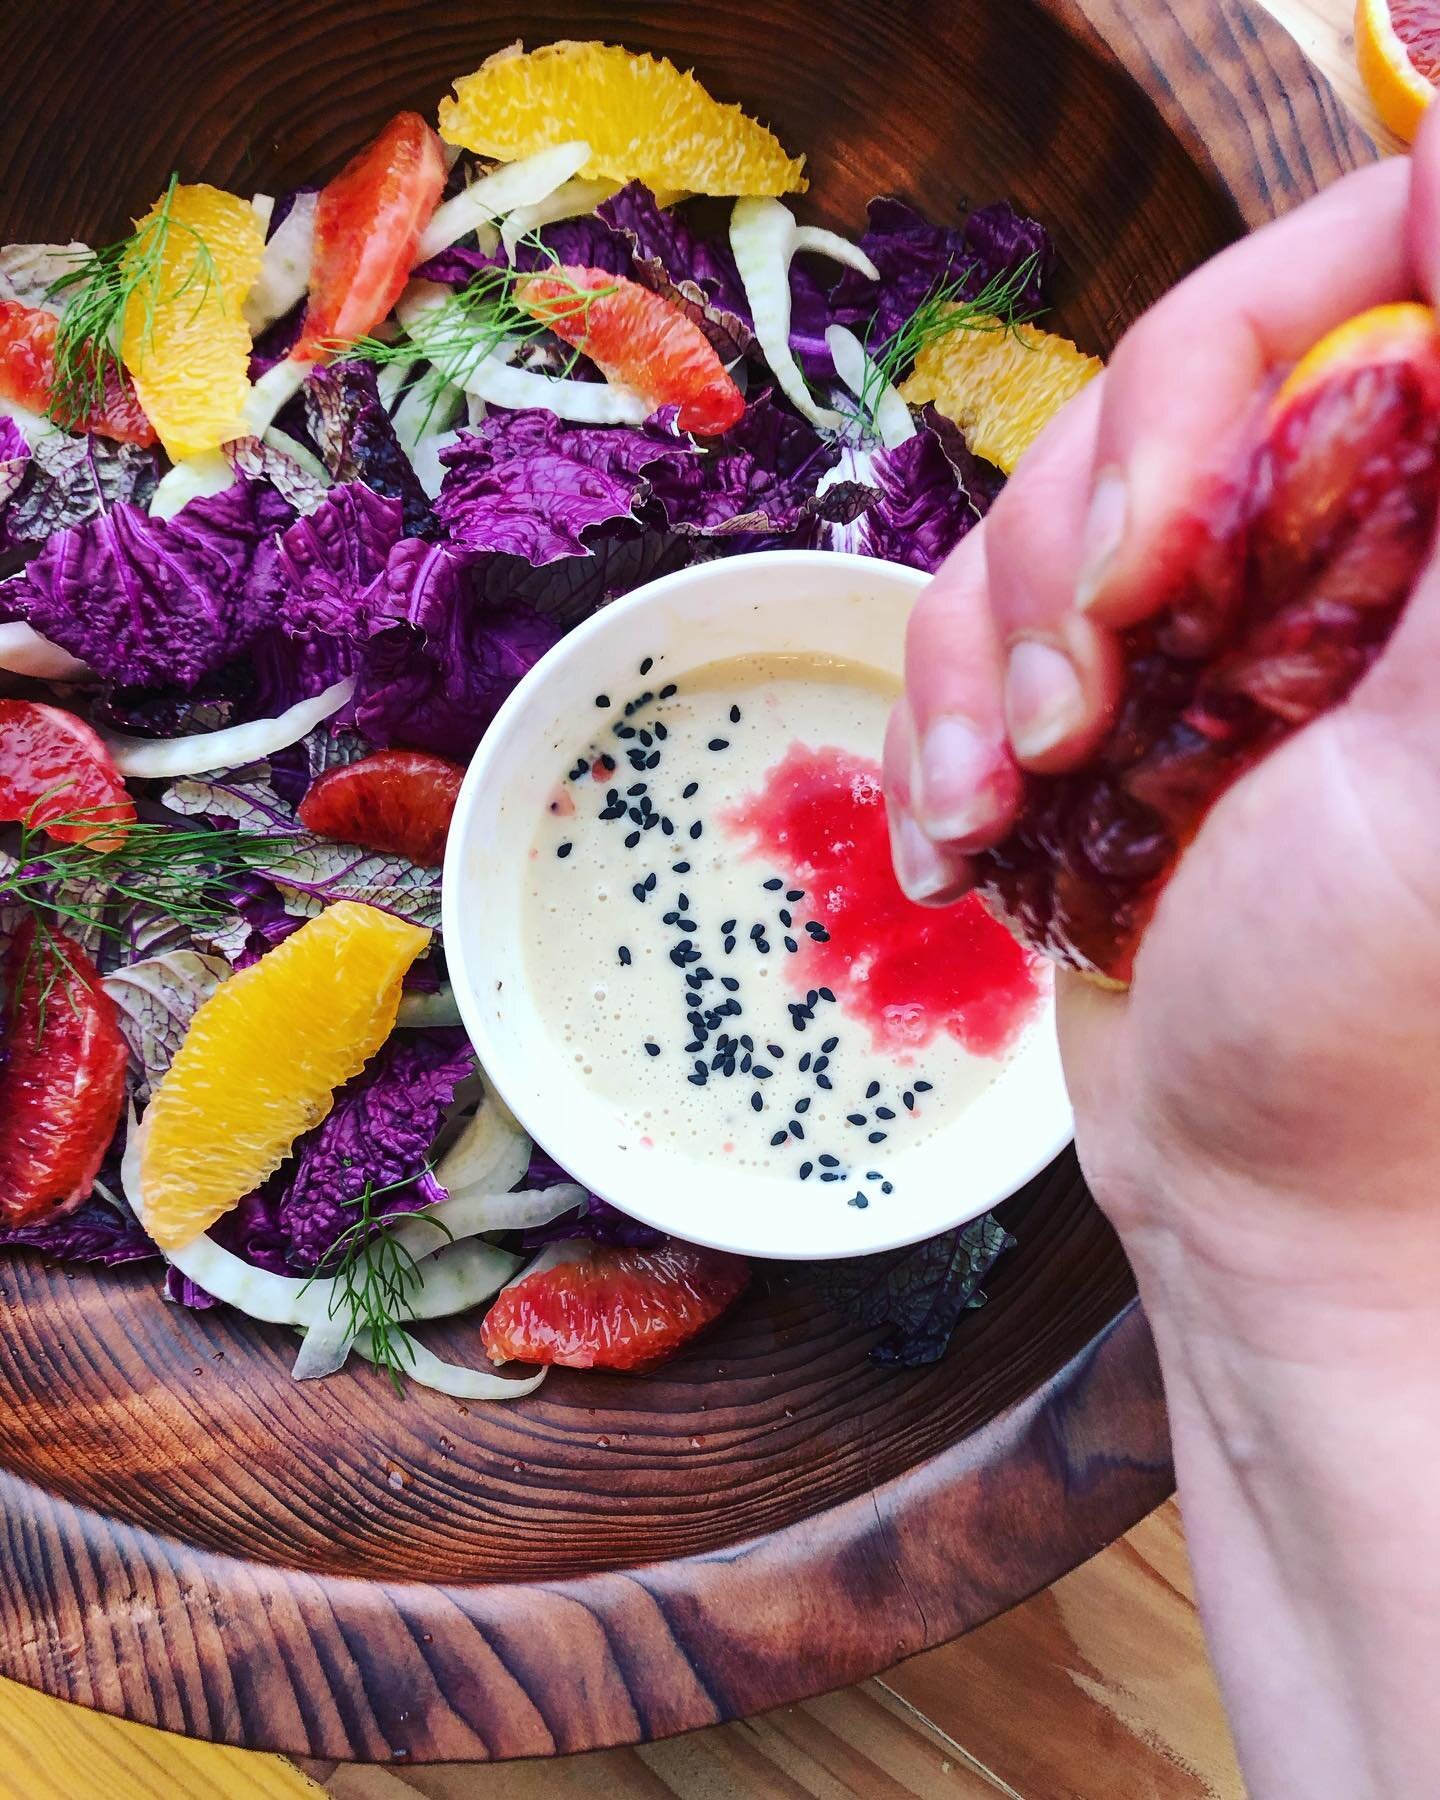 Winter salad made using local purple Napa cabbage, blood &amp; navel oranges and local fennel bulb. With a tahini &amp; citrus dressing 🍊🥬
WHY LOCAL? because its picked fresh, offering its highest nutrient content and in season! Supports our local 